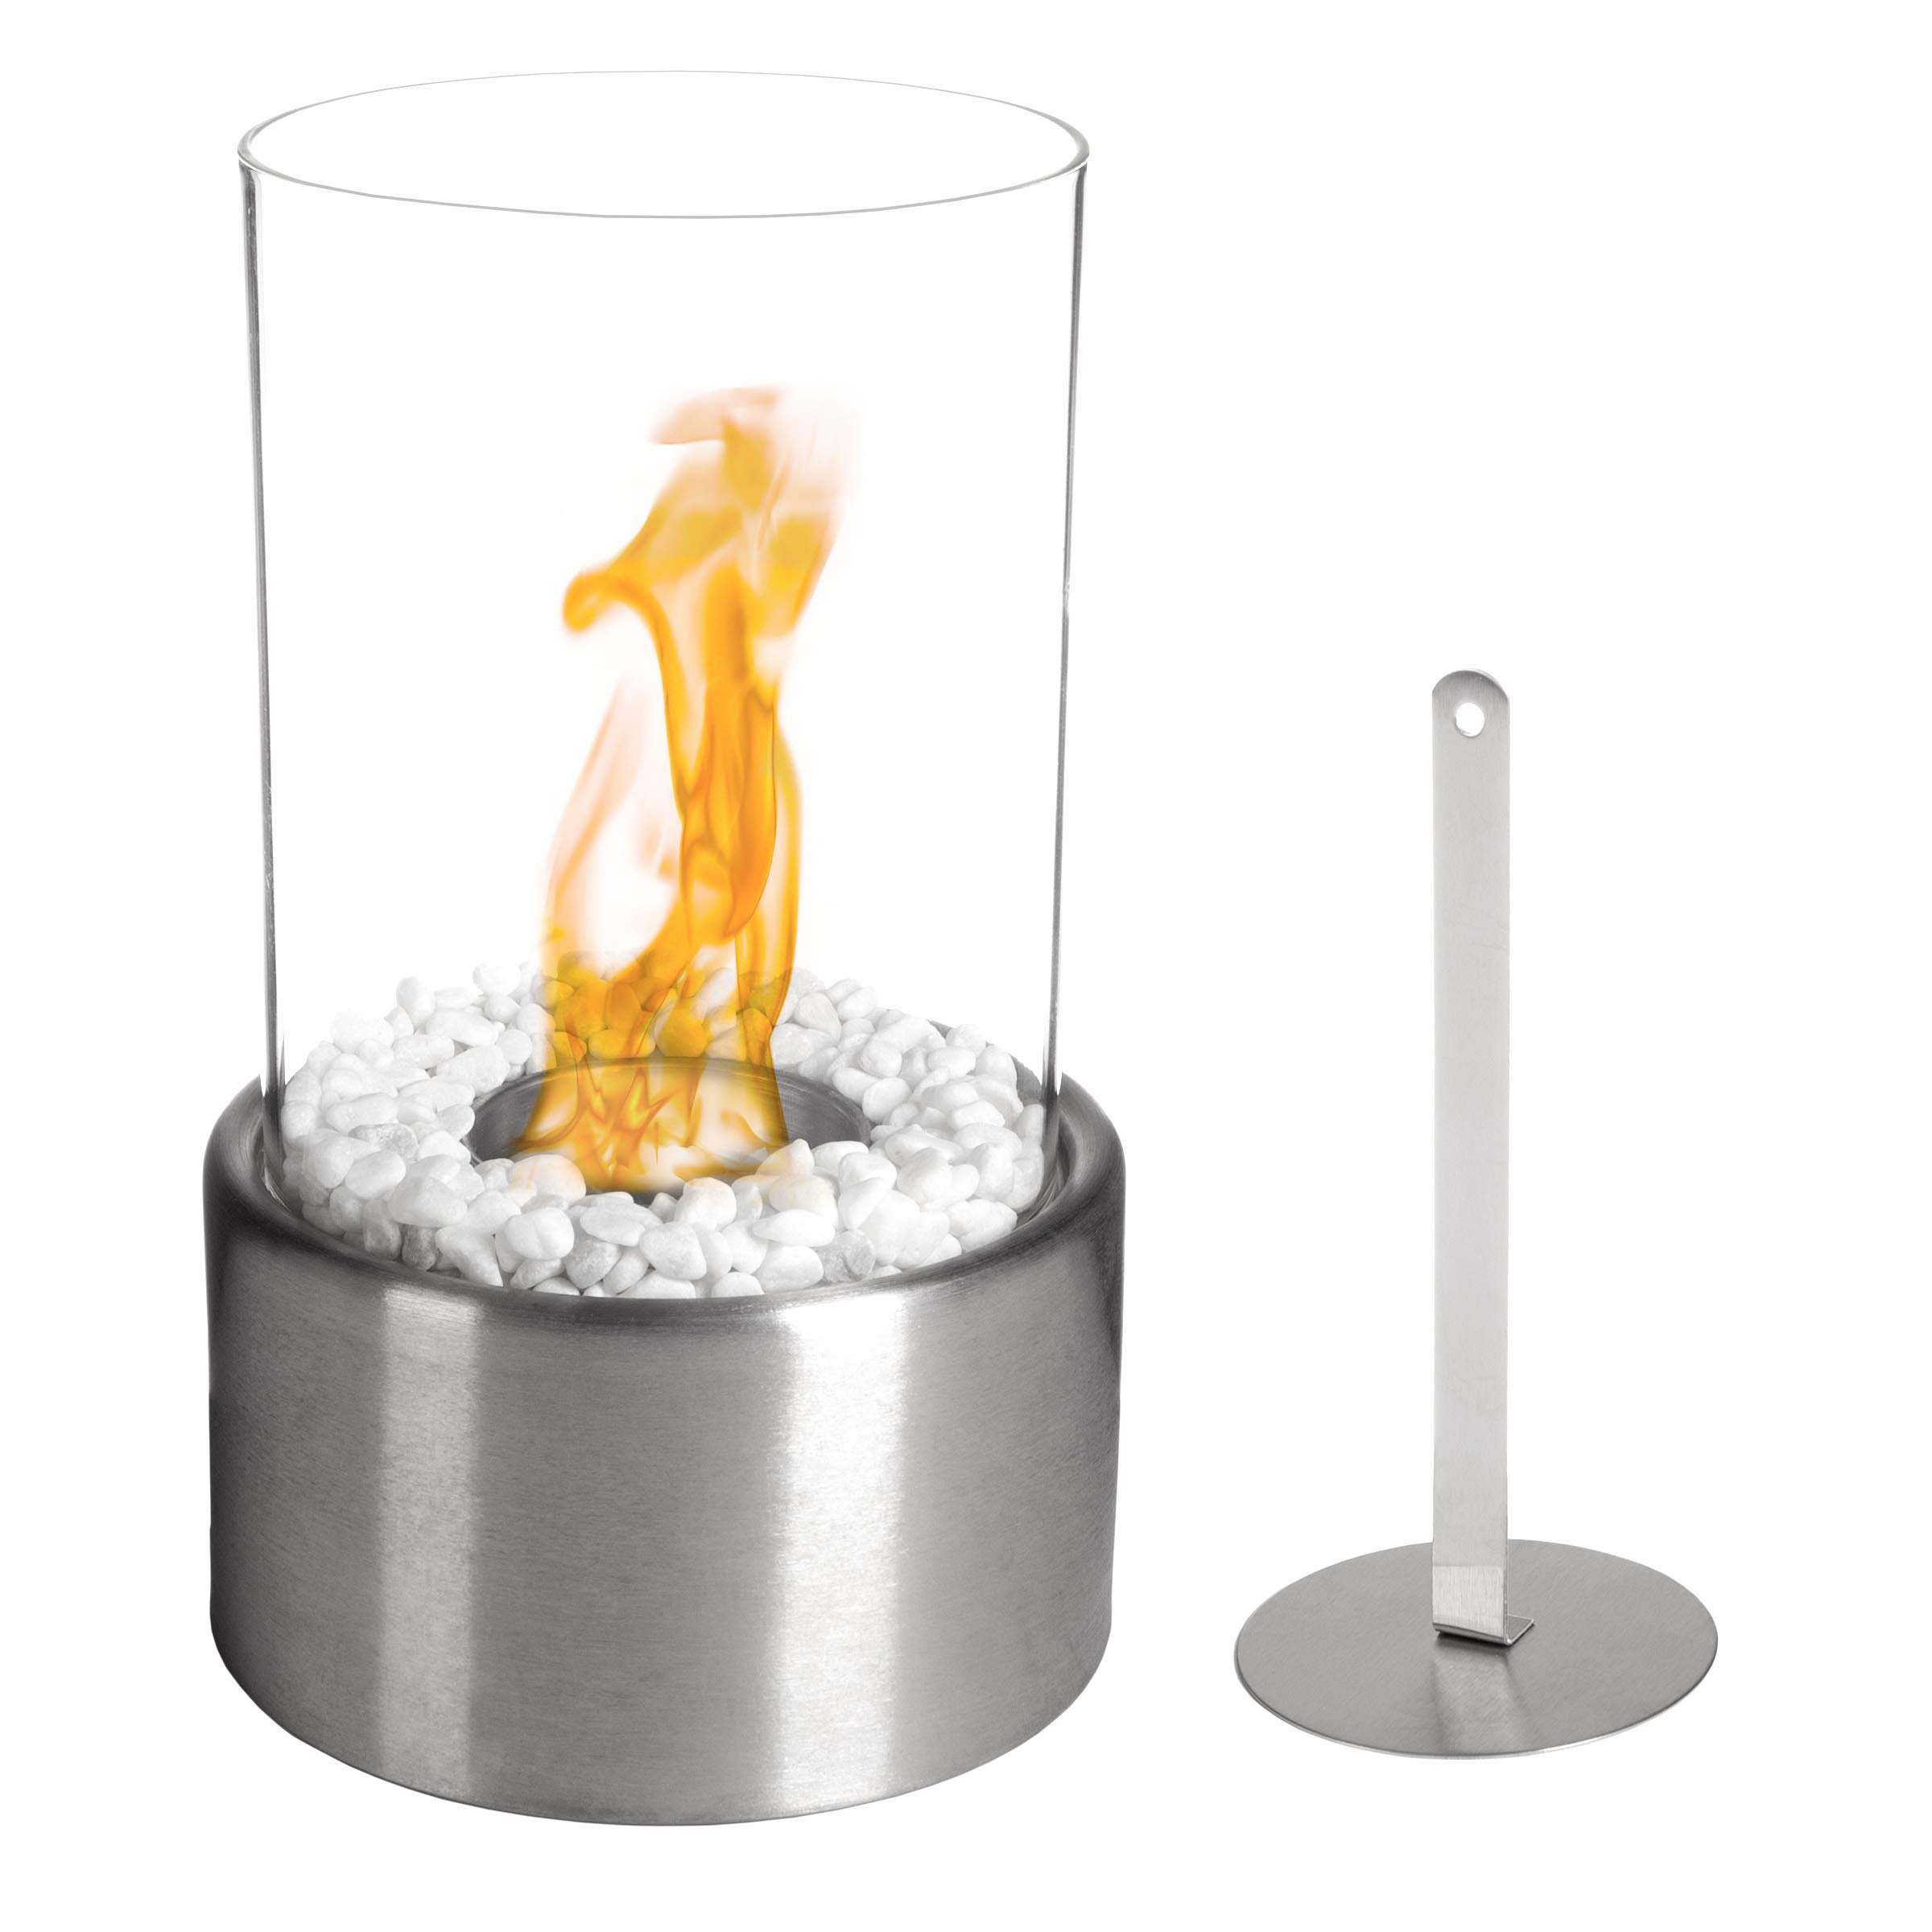 Bio Ethanol Tabletop Fire Pit - Indoor or Outdoor Smokeless Portable Fireplace - Clean Burning Ventless Cylinder with Real Flame by Northwest (Silver)